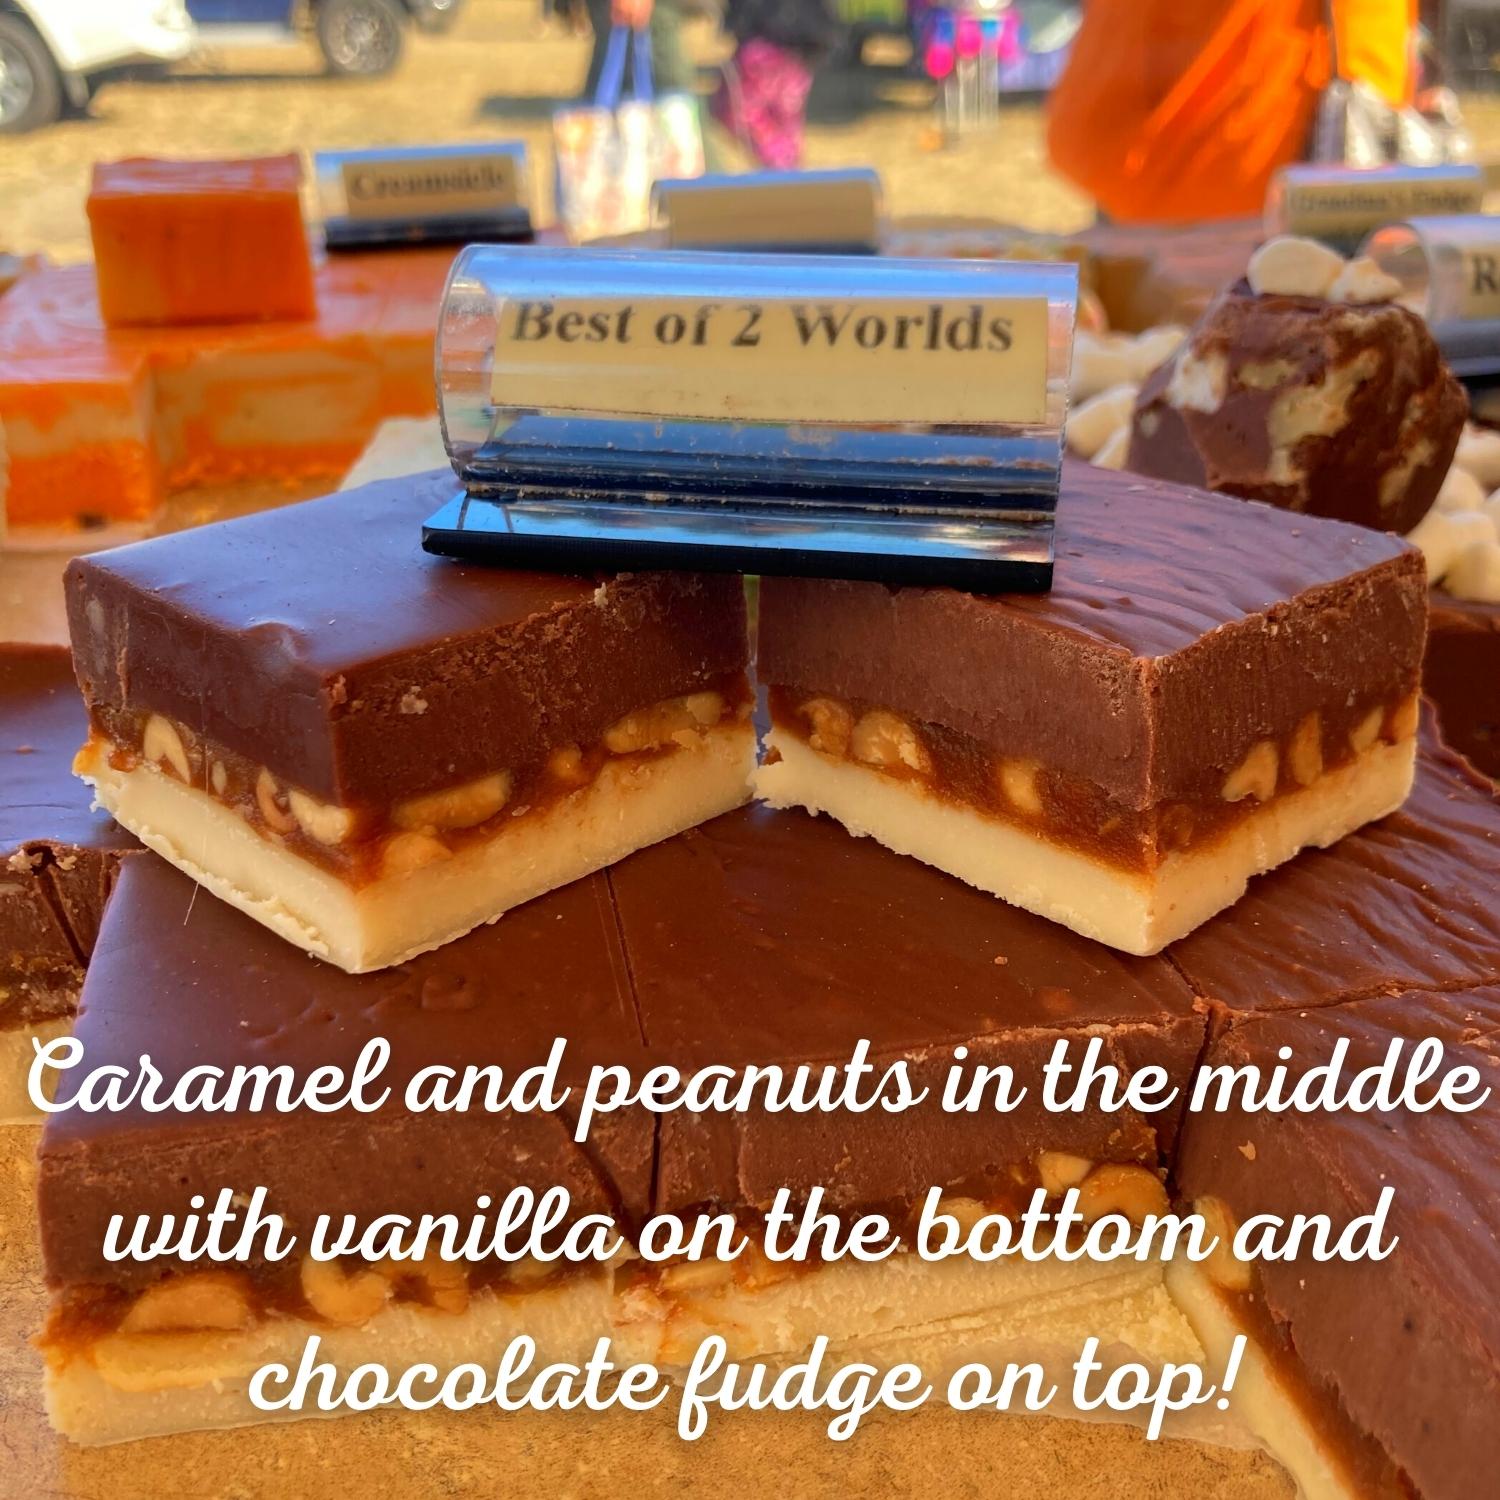 Best of 2 Worlds Fudge _ Caramel and peanuts in the middle with vanilla on the bottom and chocolate fudge on top!